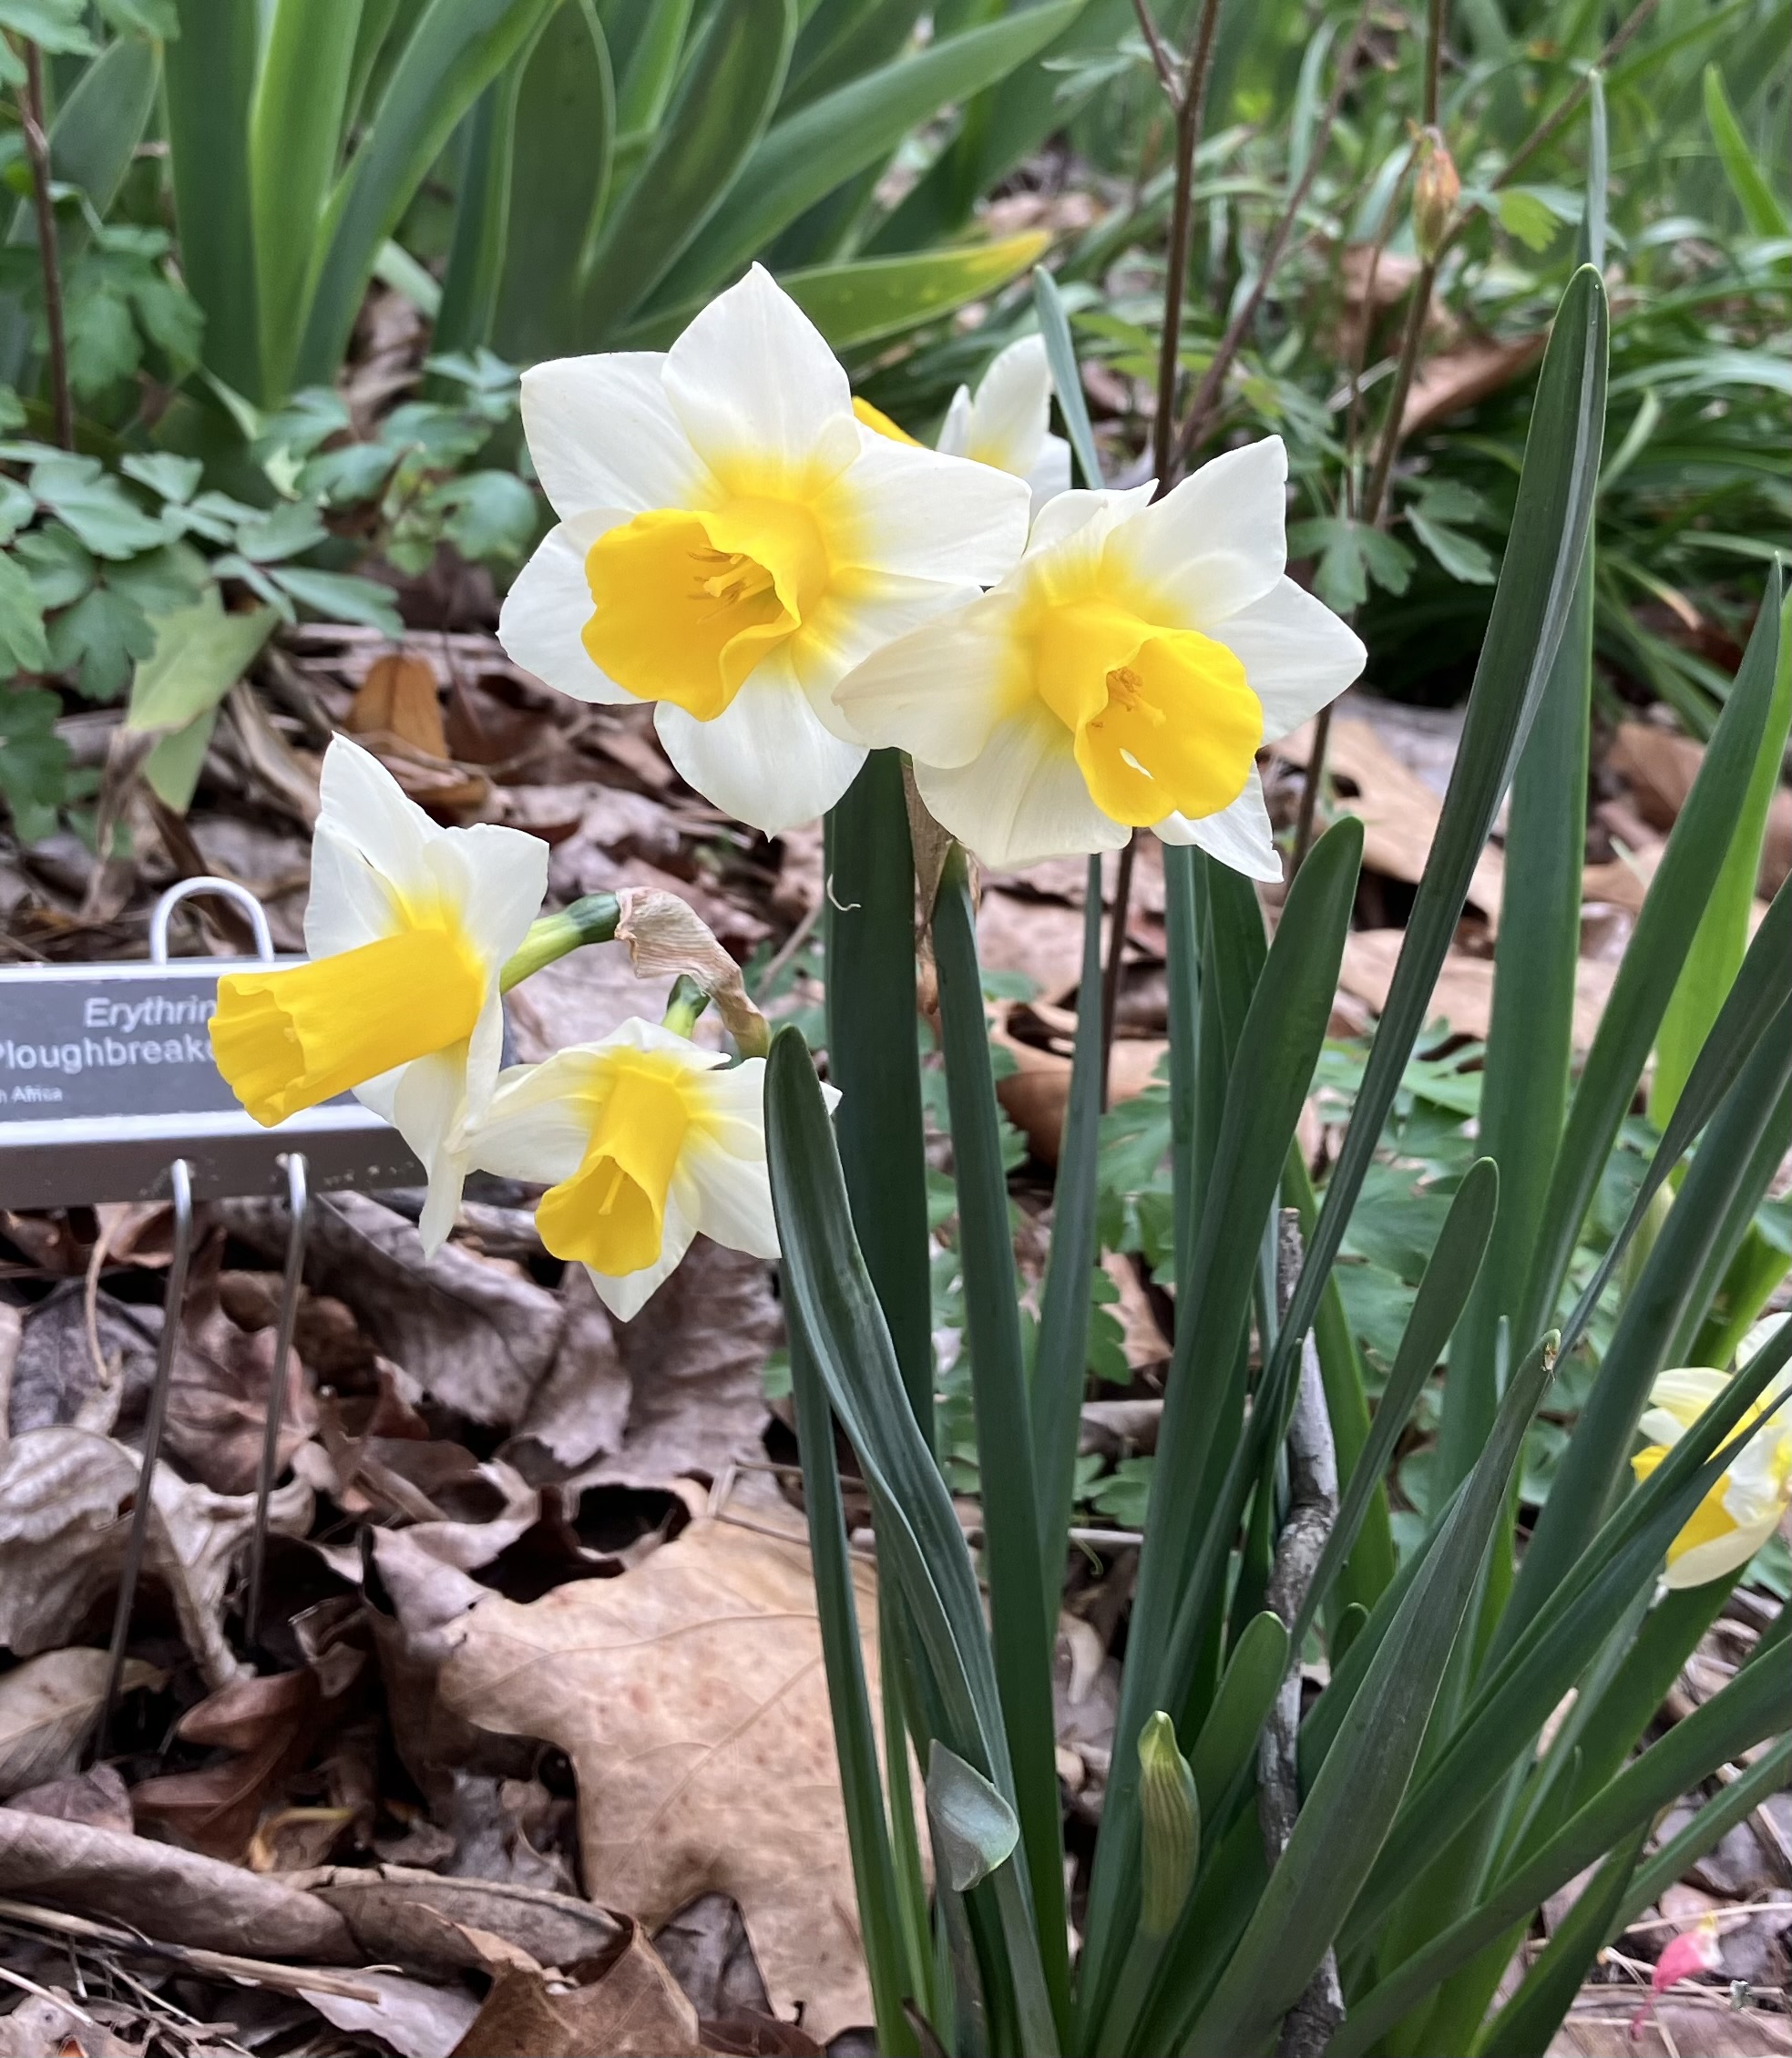 A daffodil with paired flowers with white tepals and golden corona. The foliage is a typical dark green